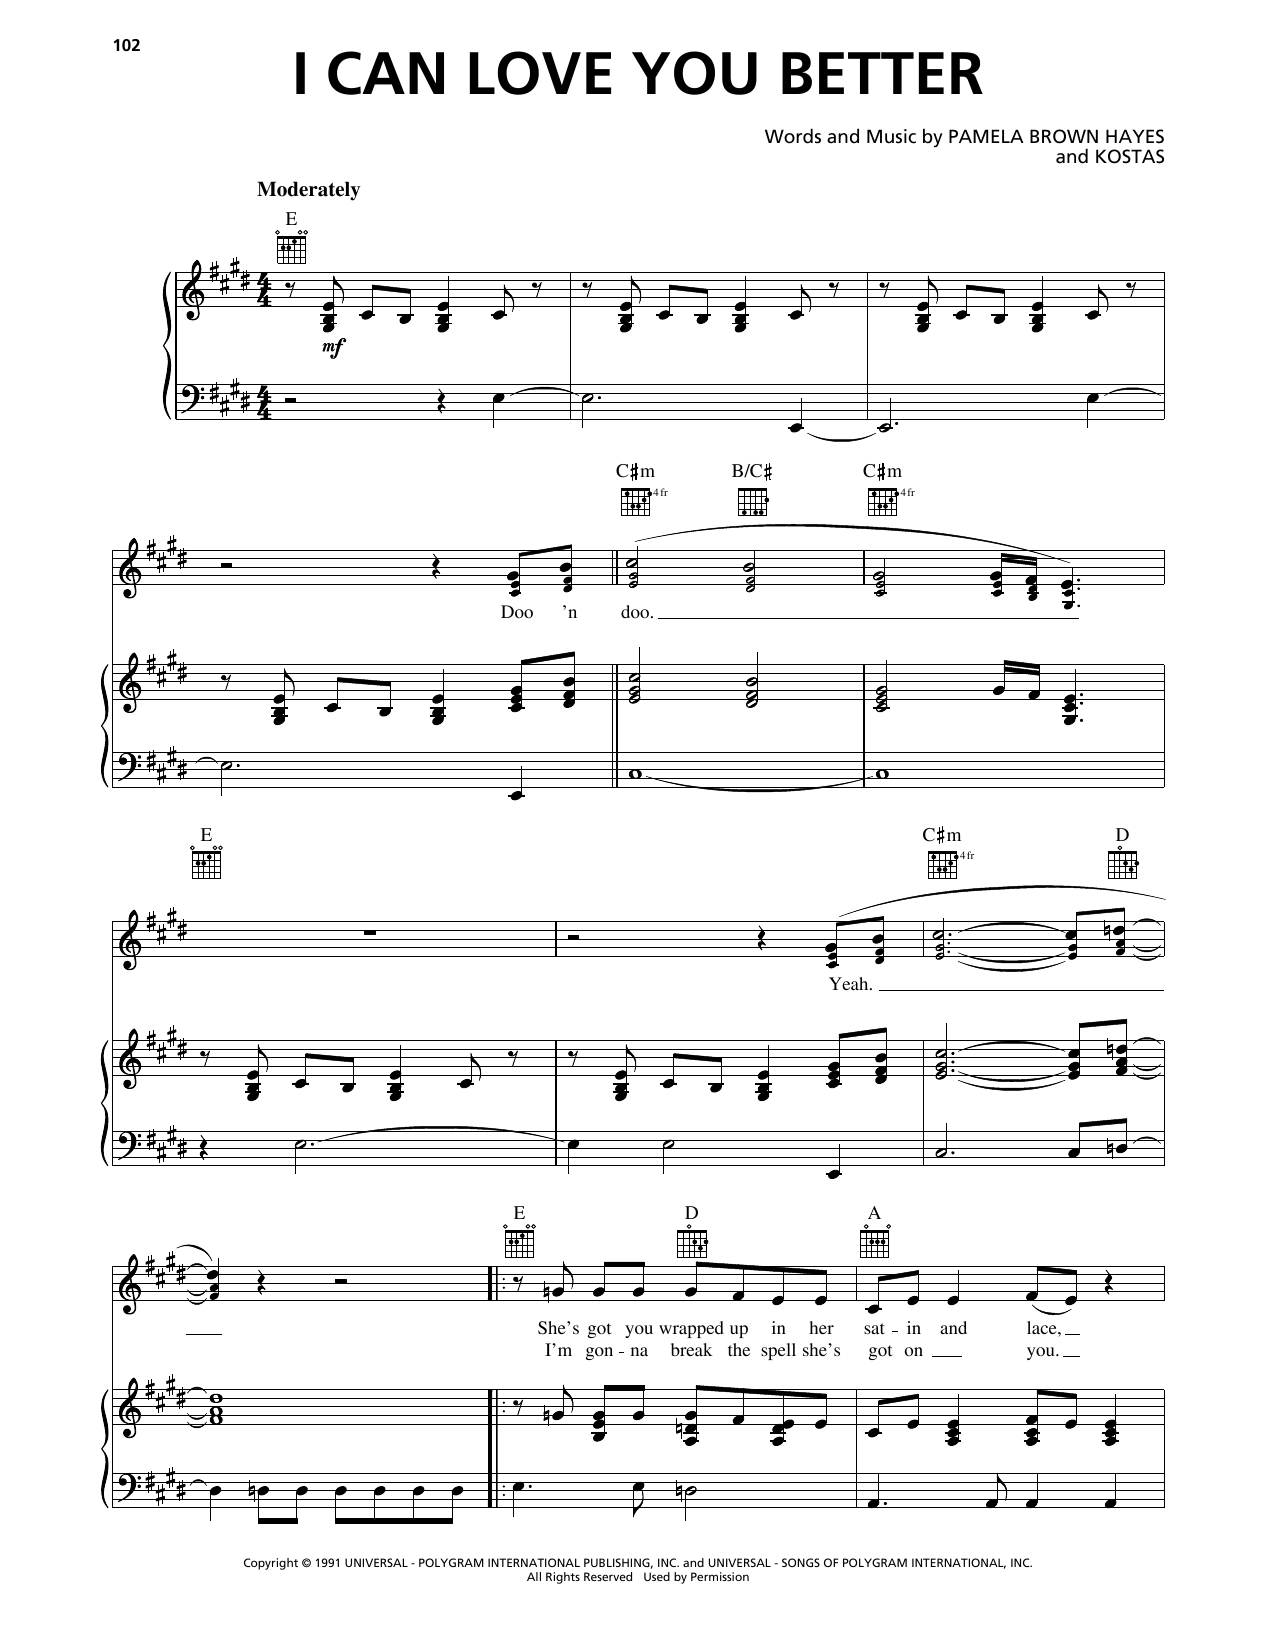 Download The Chicks I Can Love You Better Sheet Music